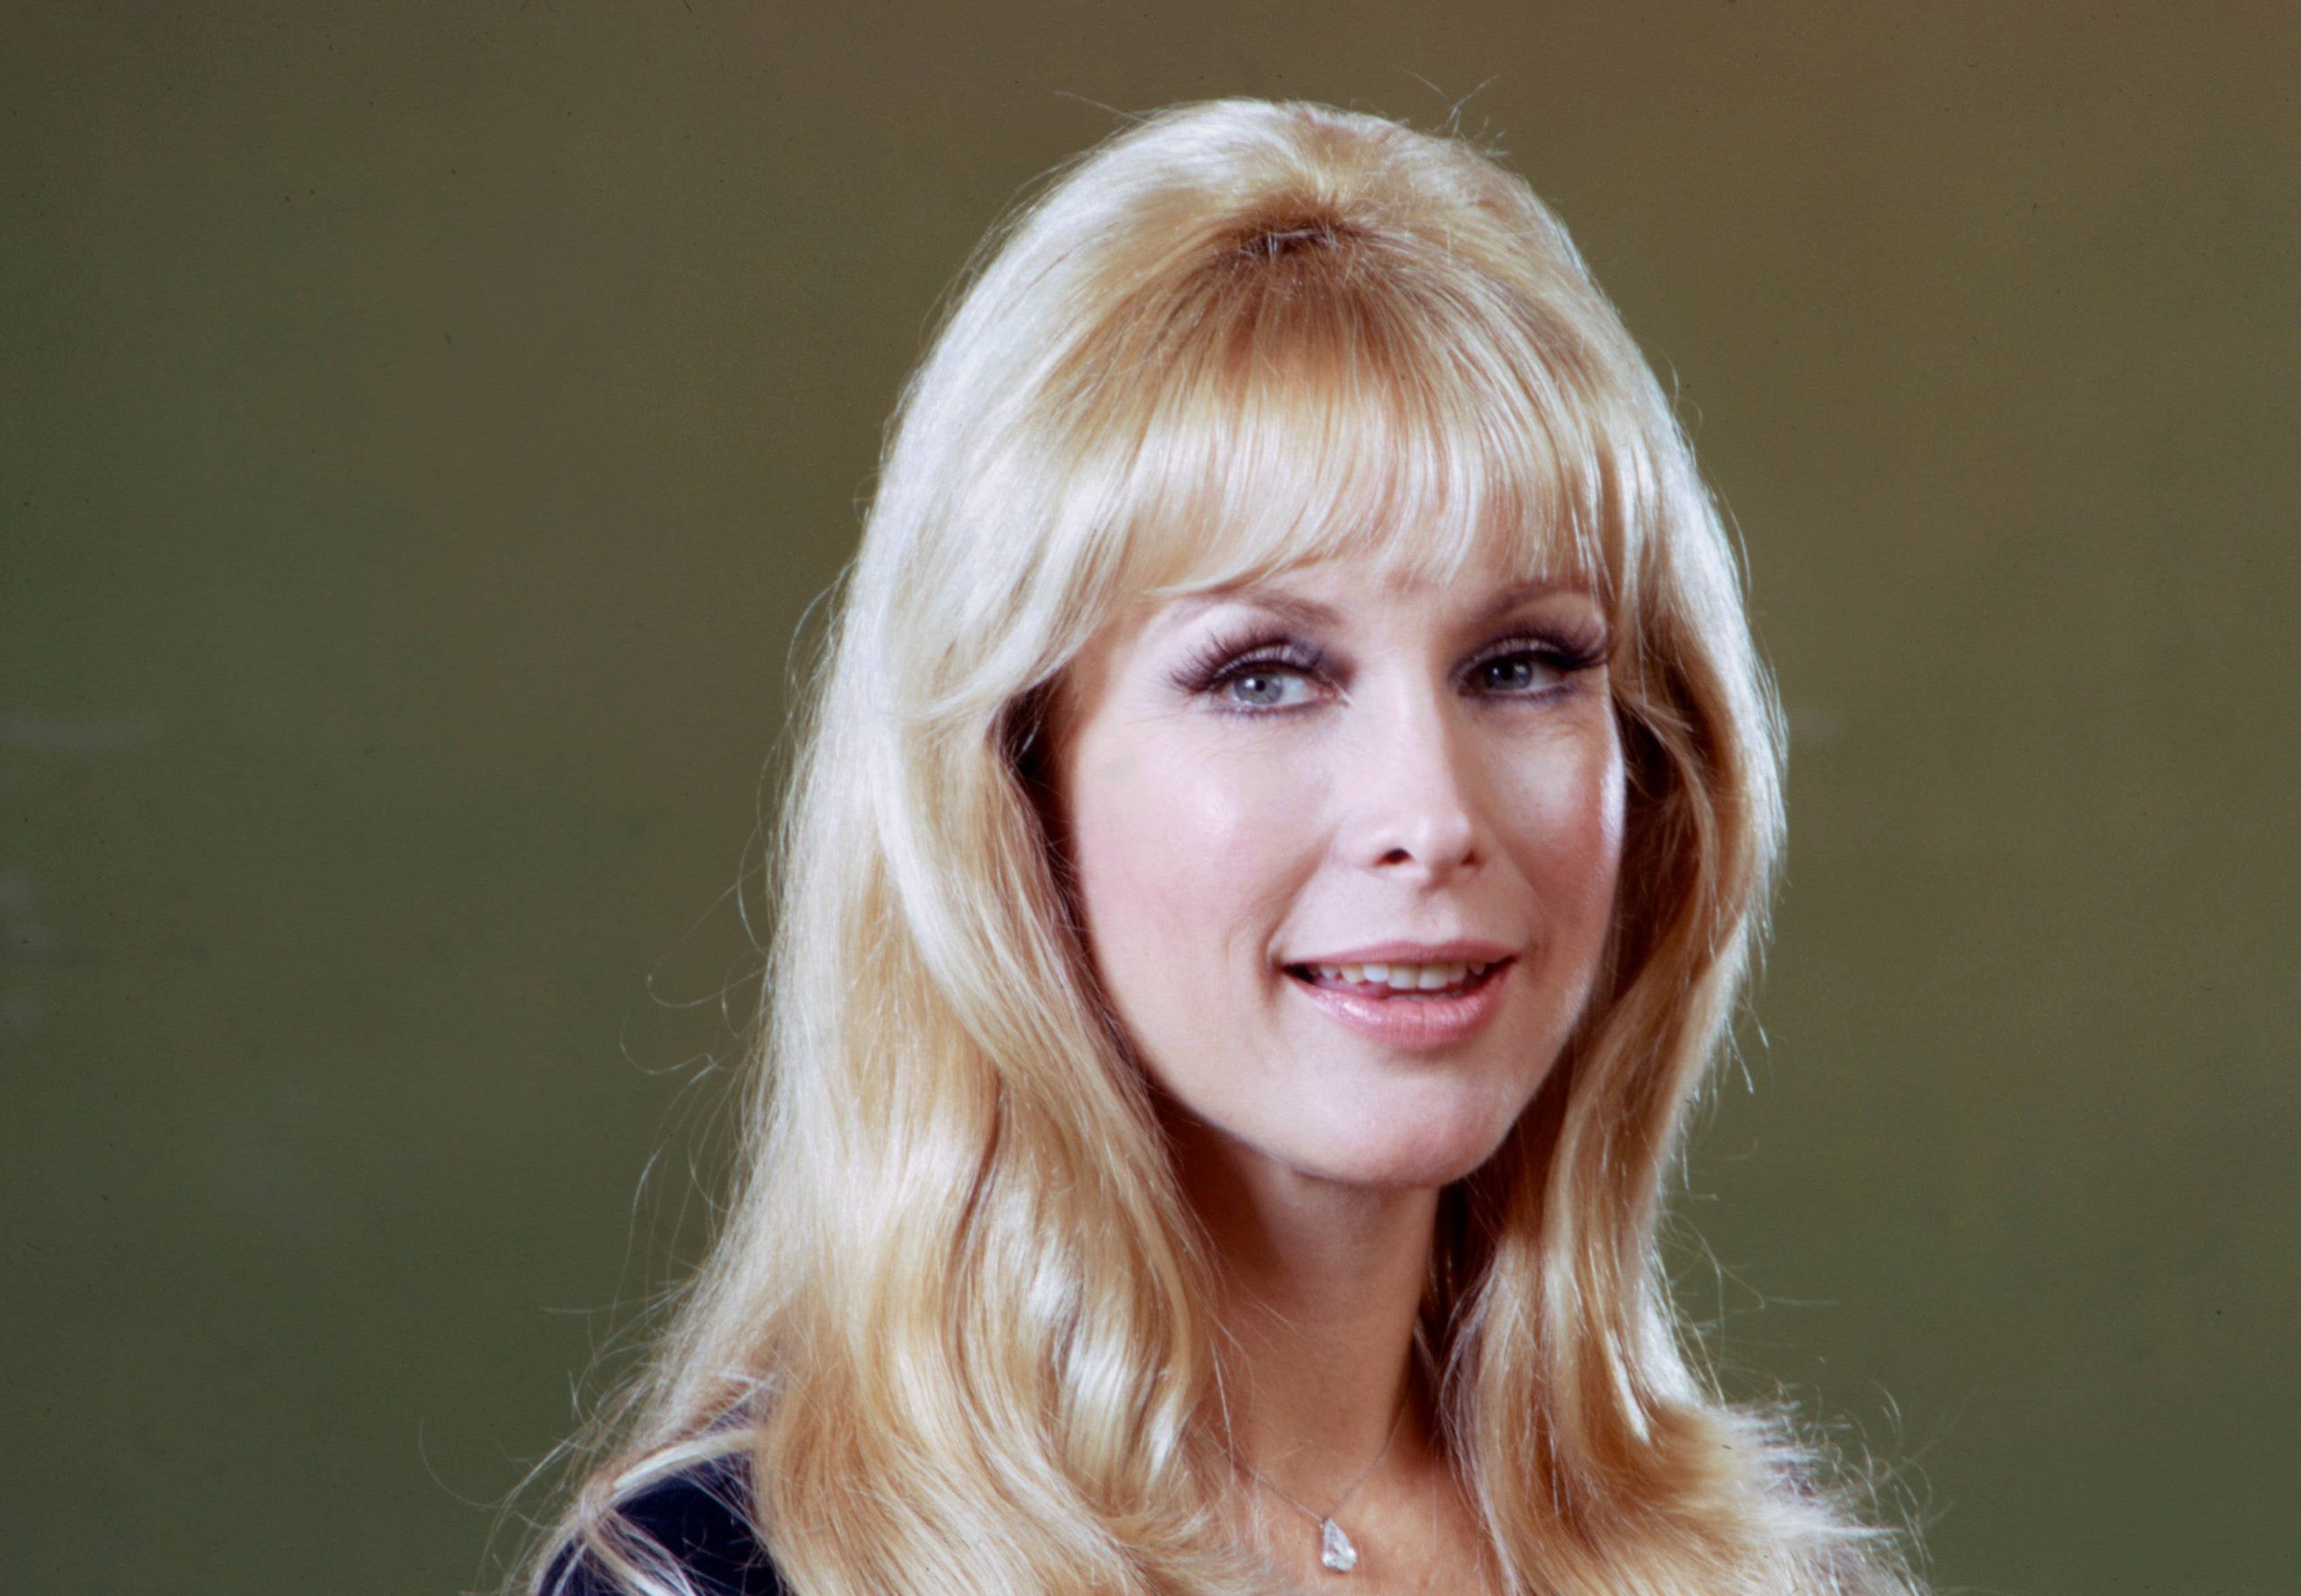 Barbara Eden Wiki, Bio, Age, Net Worth, and Other Facts - FactsFive.